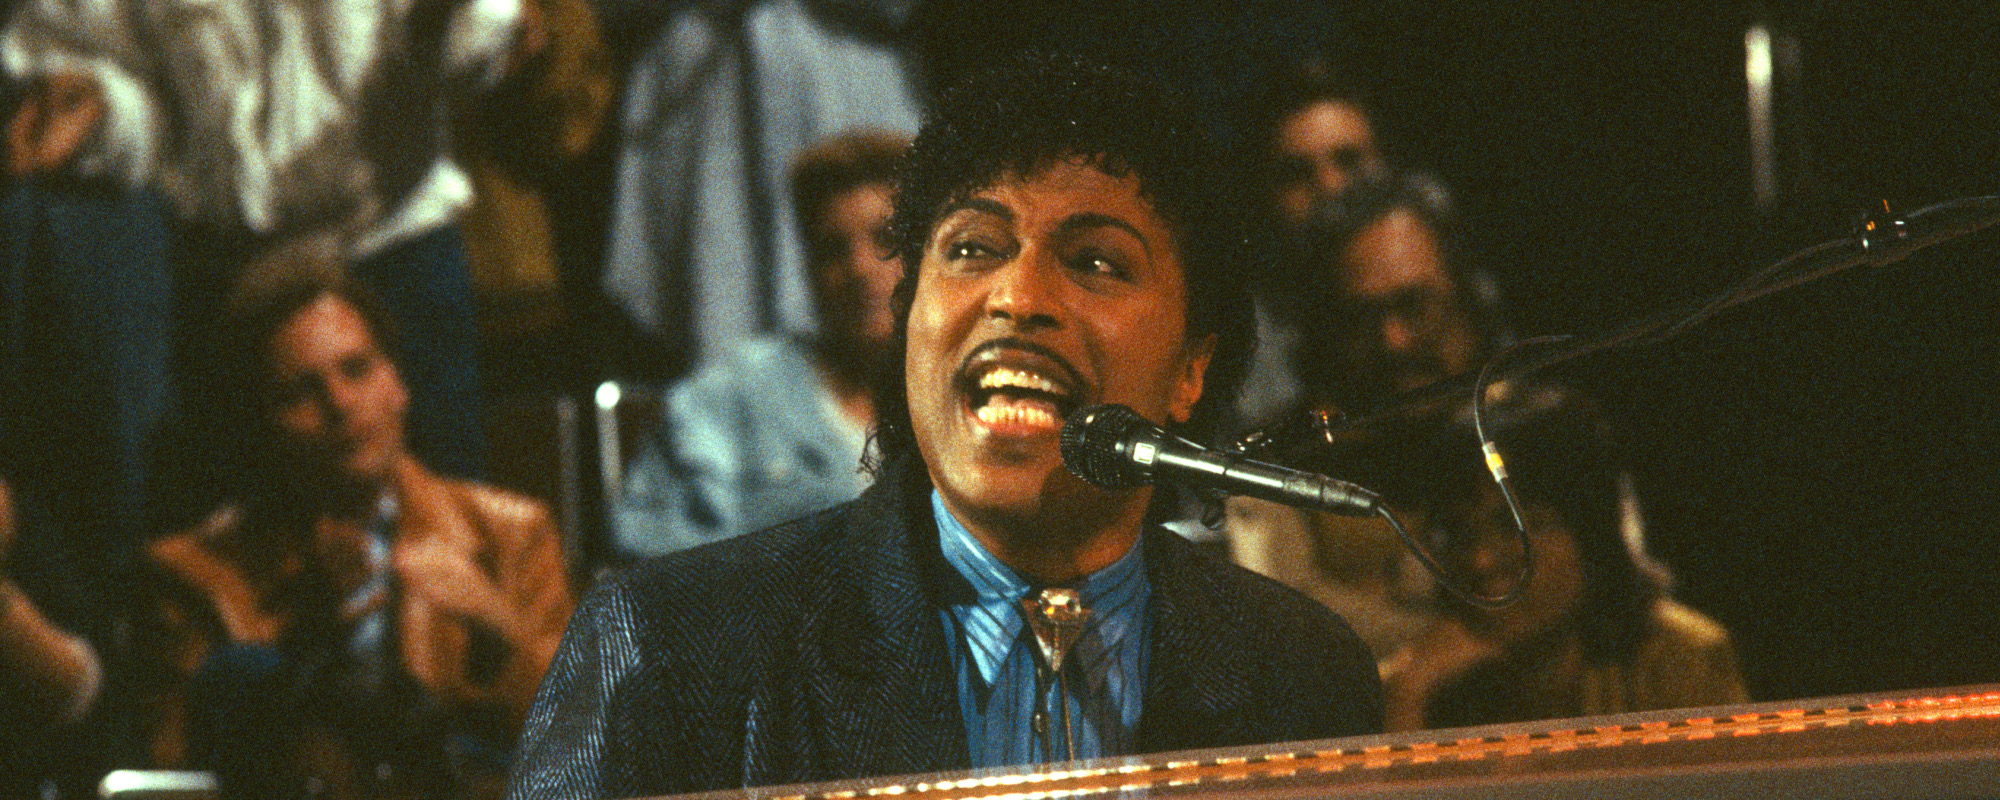 Watch: First Look at Upcoming Little Richard Documentary